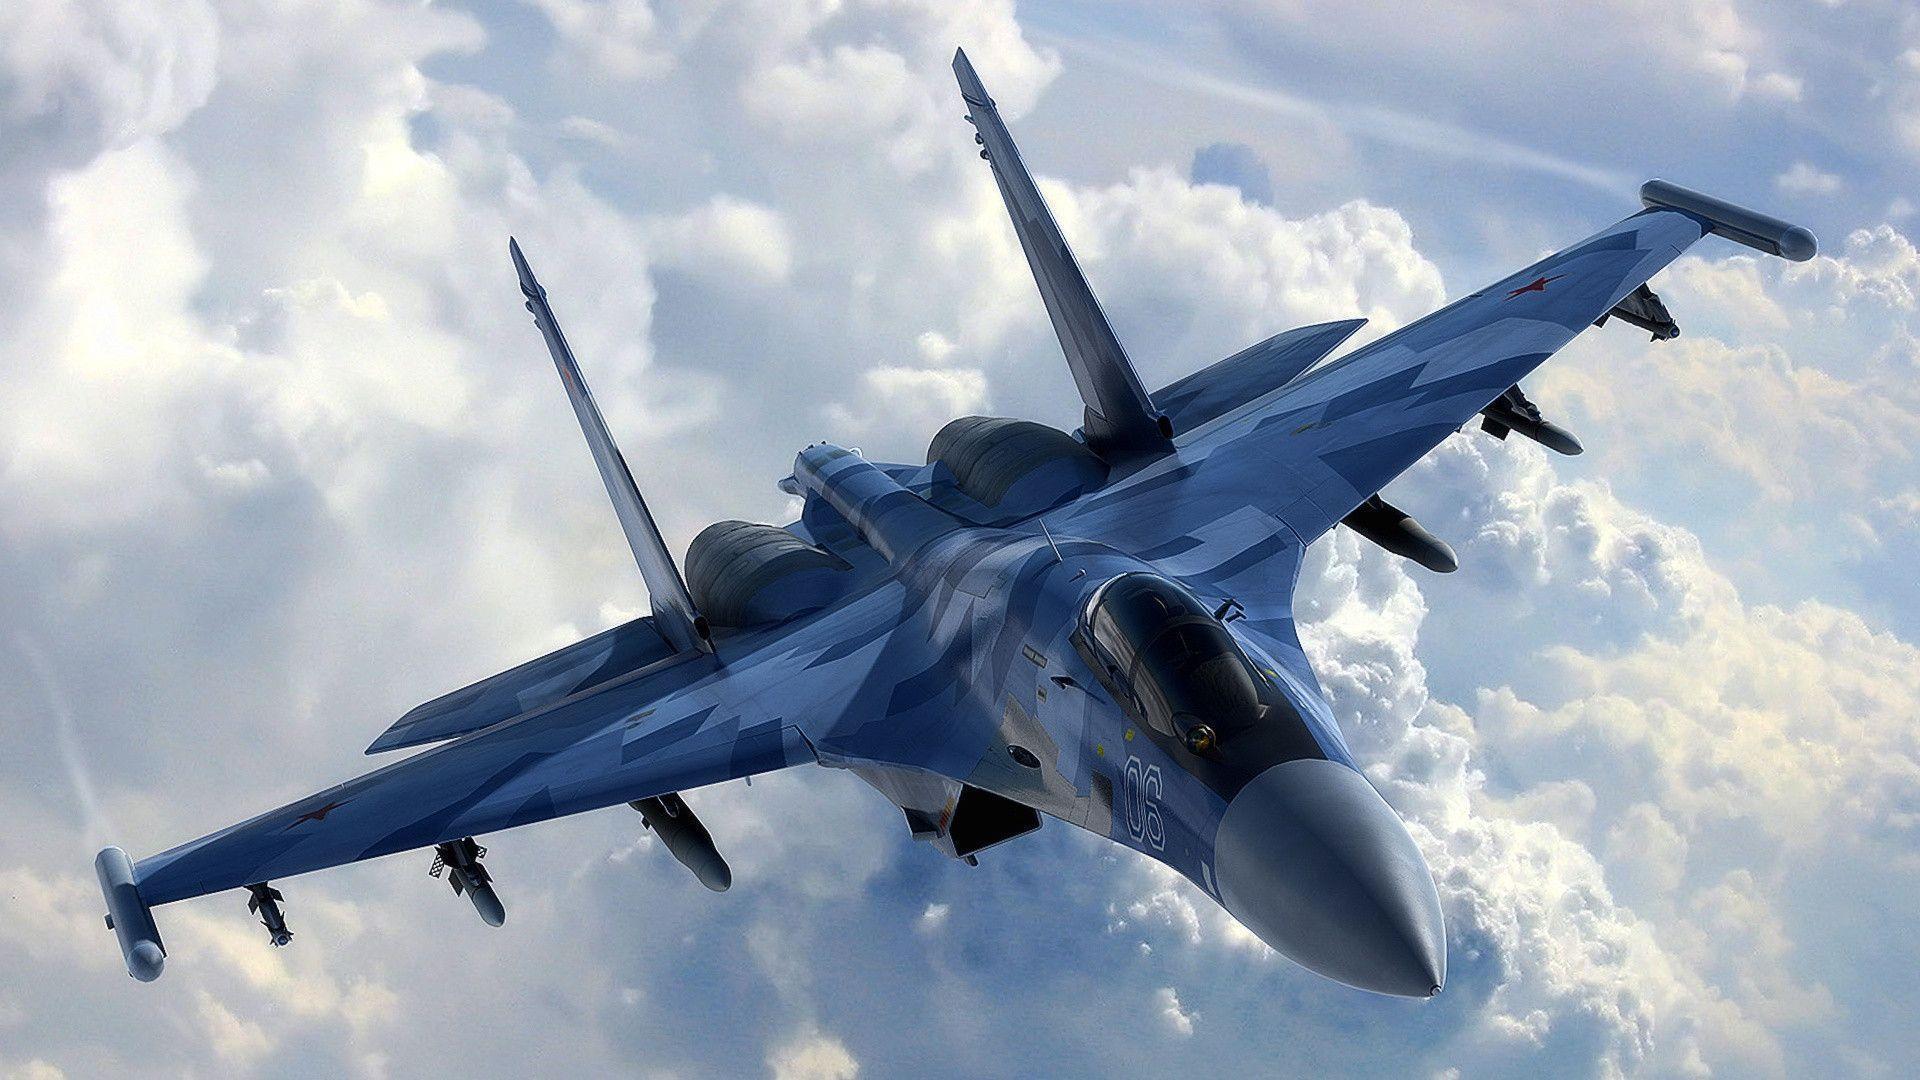 Fighter Jets HD Wallpaper. Airforce Fighter Jet Picture. Cool